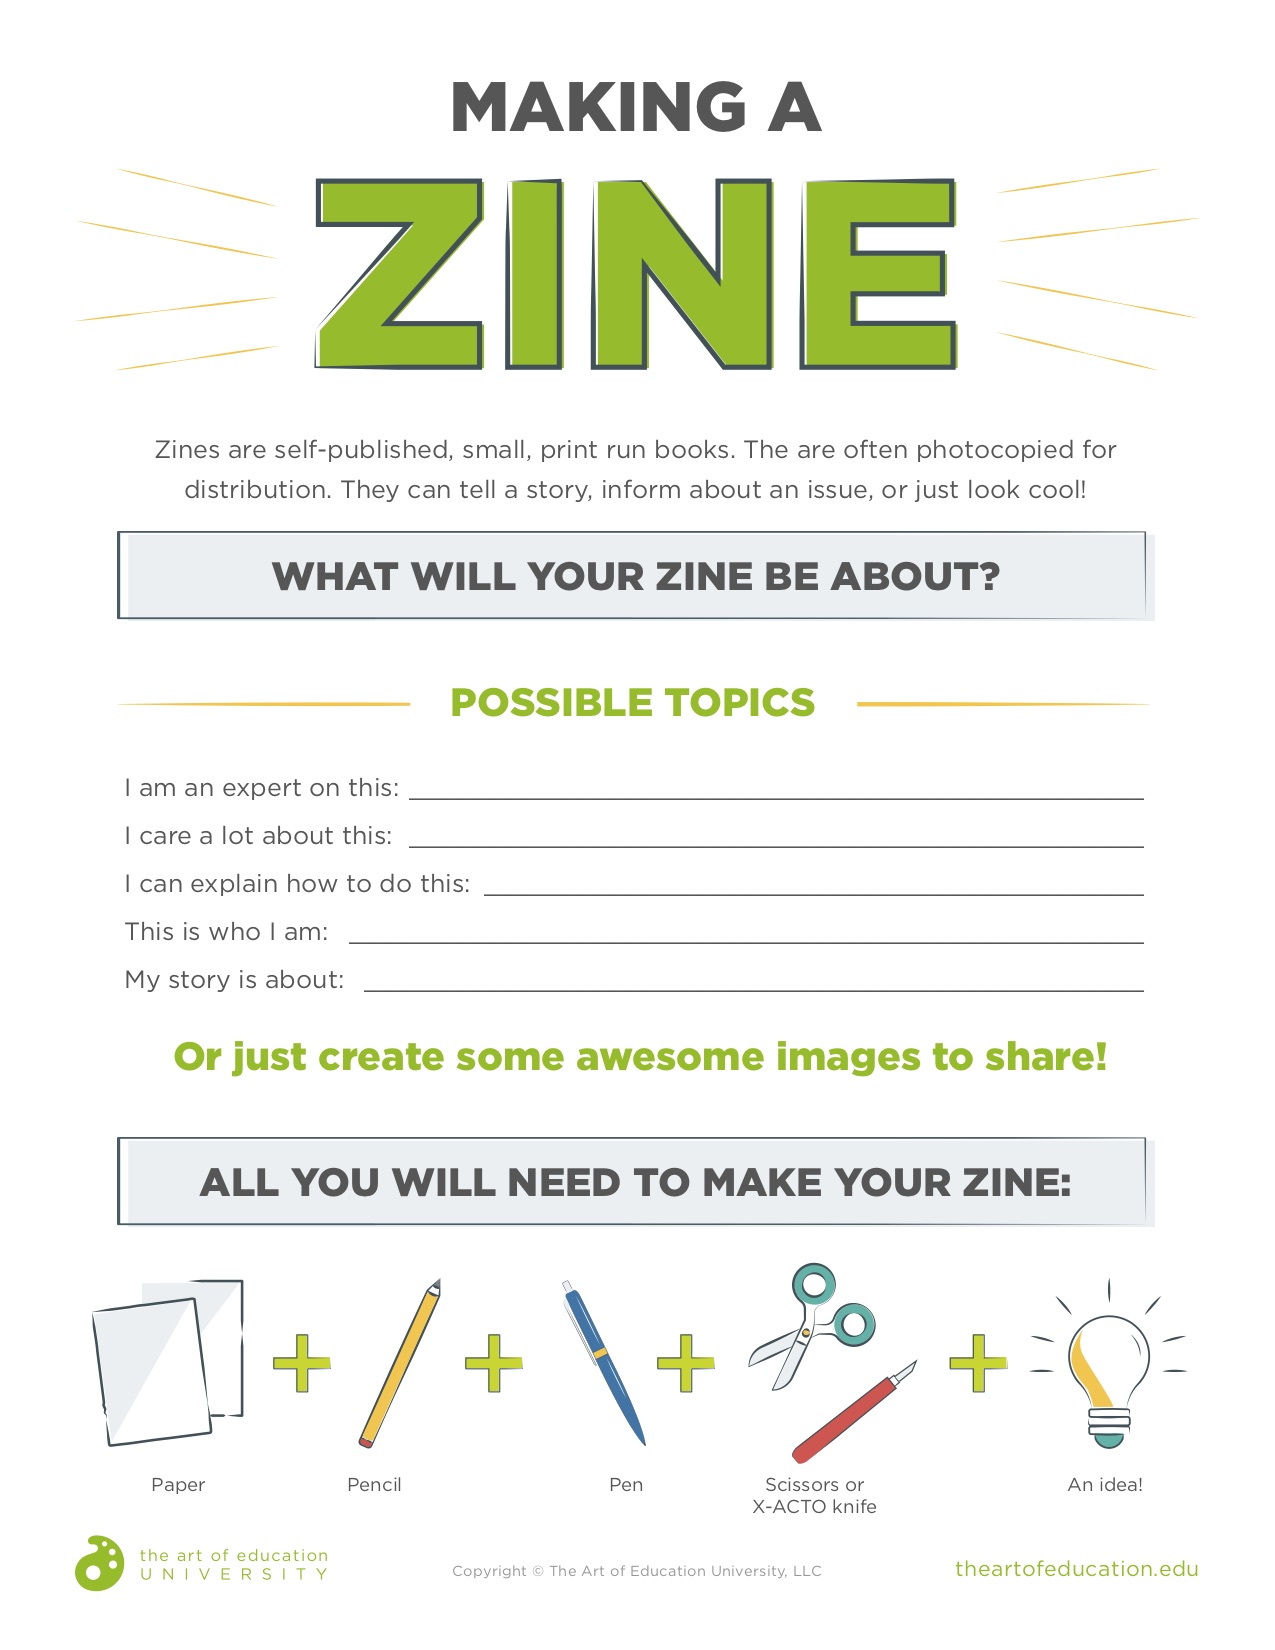 A worksheet for students to fill out when making their own zine, titled "Making a Zine."